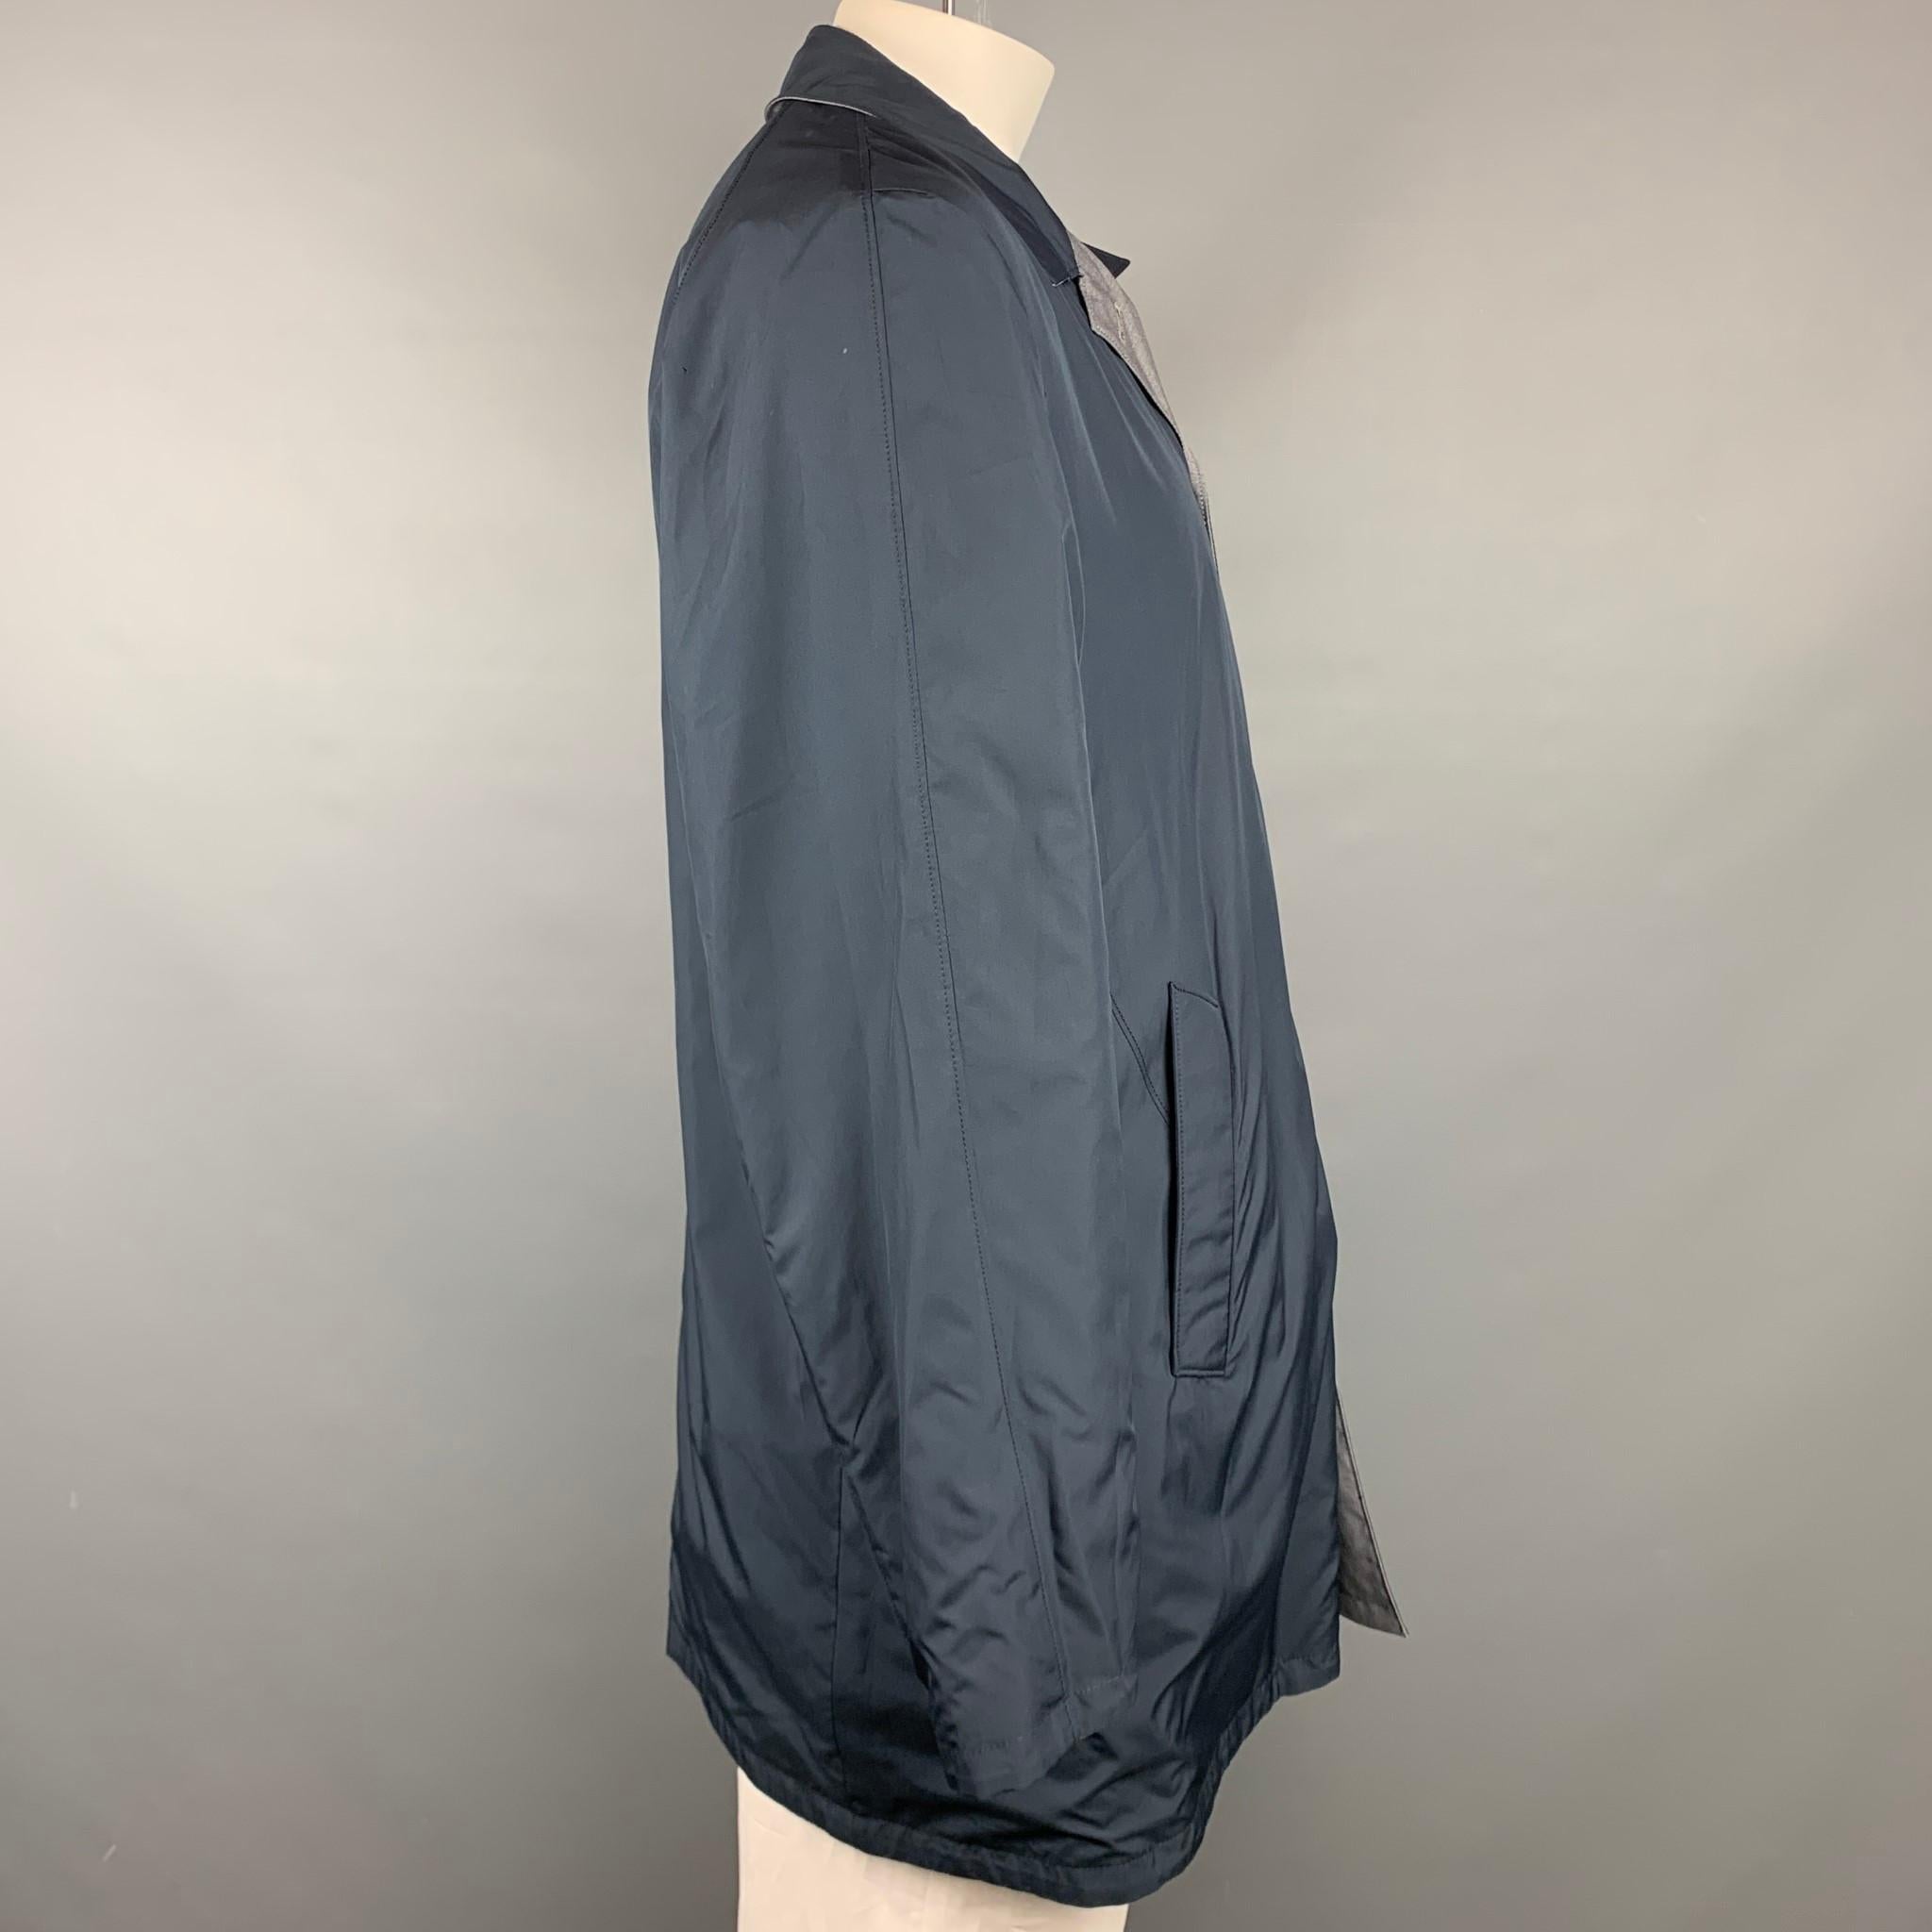 ISAIA coat comes in a navy & grey two toned wool / polyester featuring a reversible style, slit pockets, spread collar, and a buttoned closure. Made in Italy.

Very Good Pre-Owned Condition.
Marked: IT 56

Measurements:

Shoulder: 17.5 in.
Chest: 46